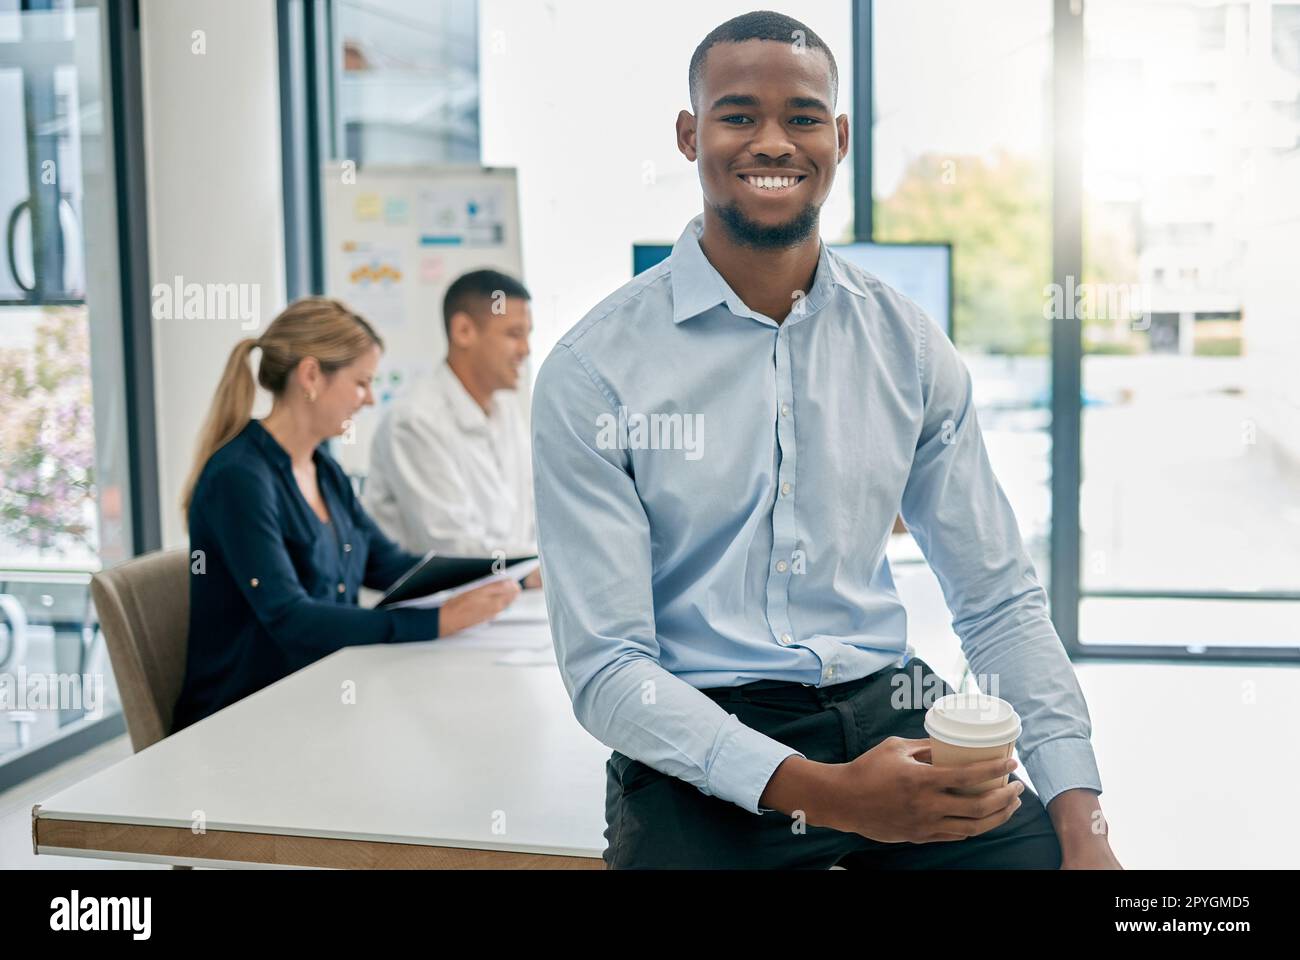 Face portrait, leadership and black man in meeting ready for goals or targets. Ceo, boss and young, happy and confident male entrepreneur with vision, mission and success mindset in company workplace Stock Photo